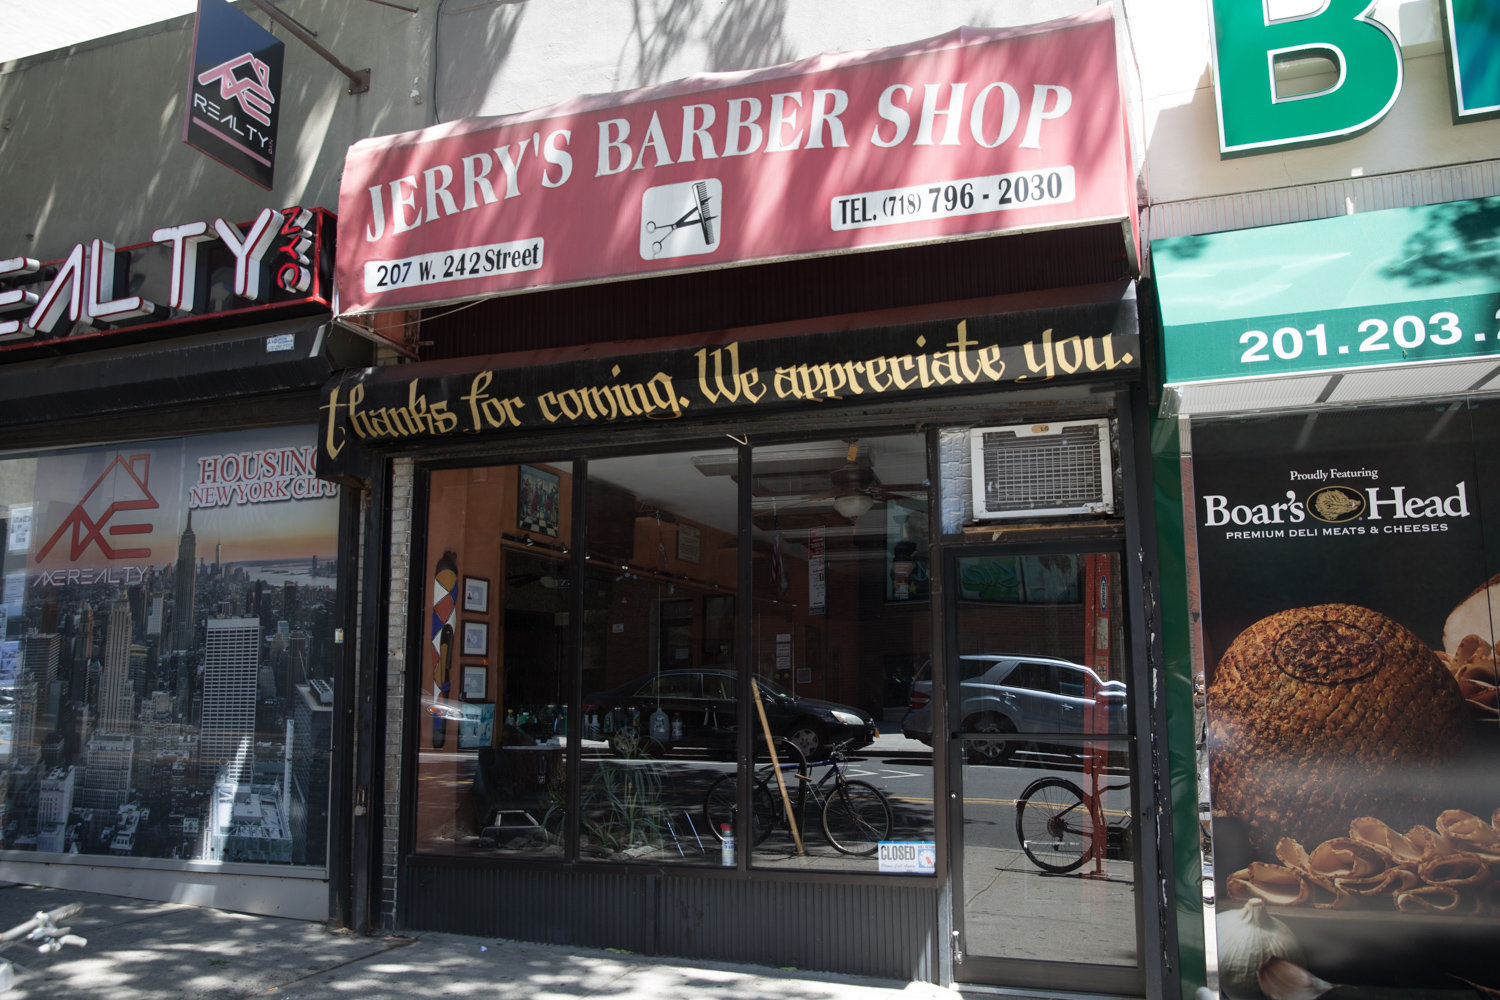 Like many salons and barber shops, Jerry’s Barber Shop on West 242nd Street has suffered from a lack of business due to the coronavirus pandemic, but with reopening already under way, things could return to some kind of normal.